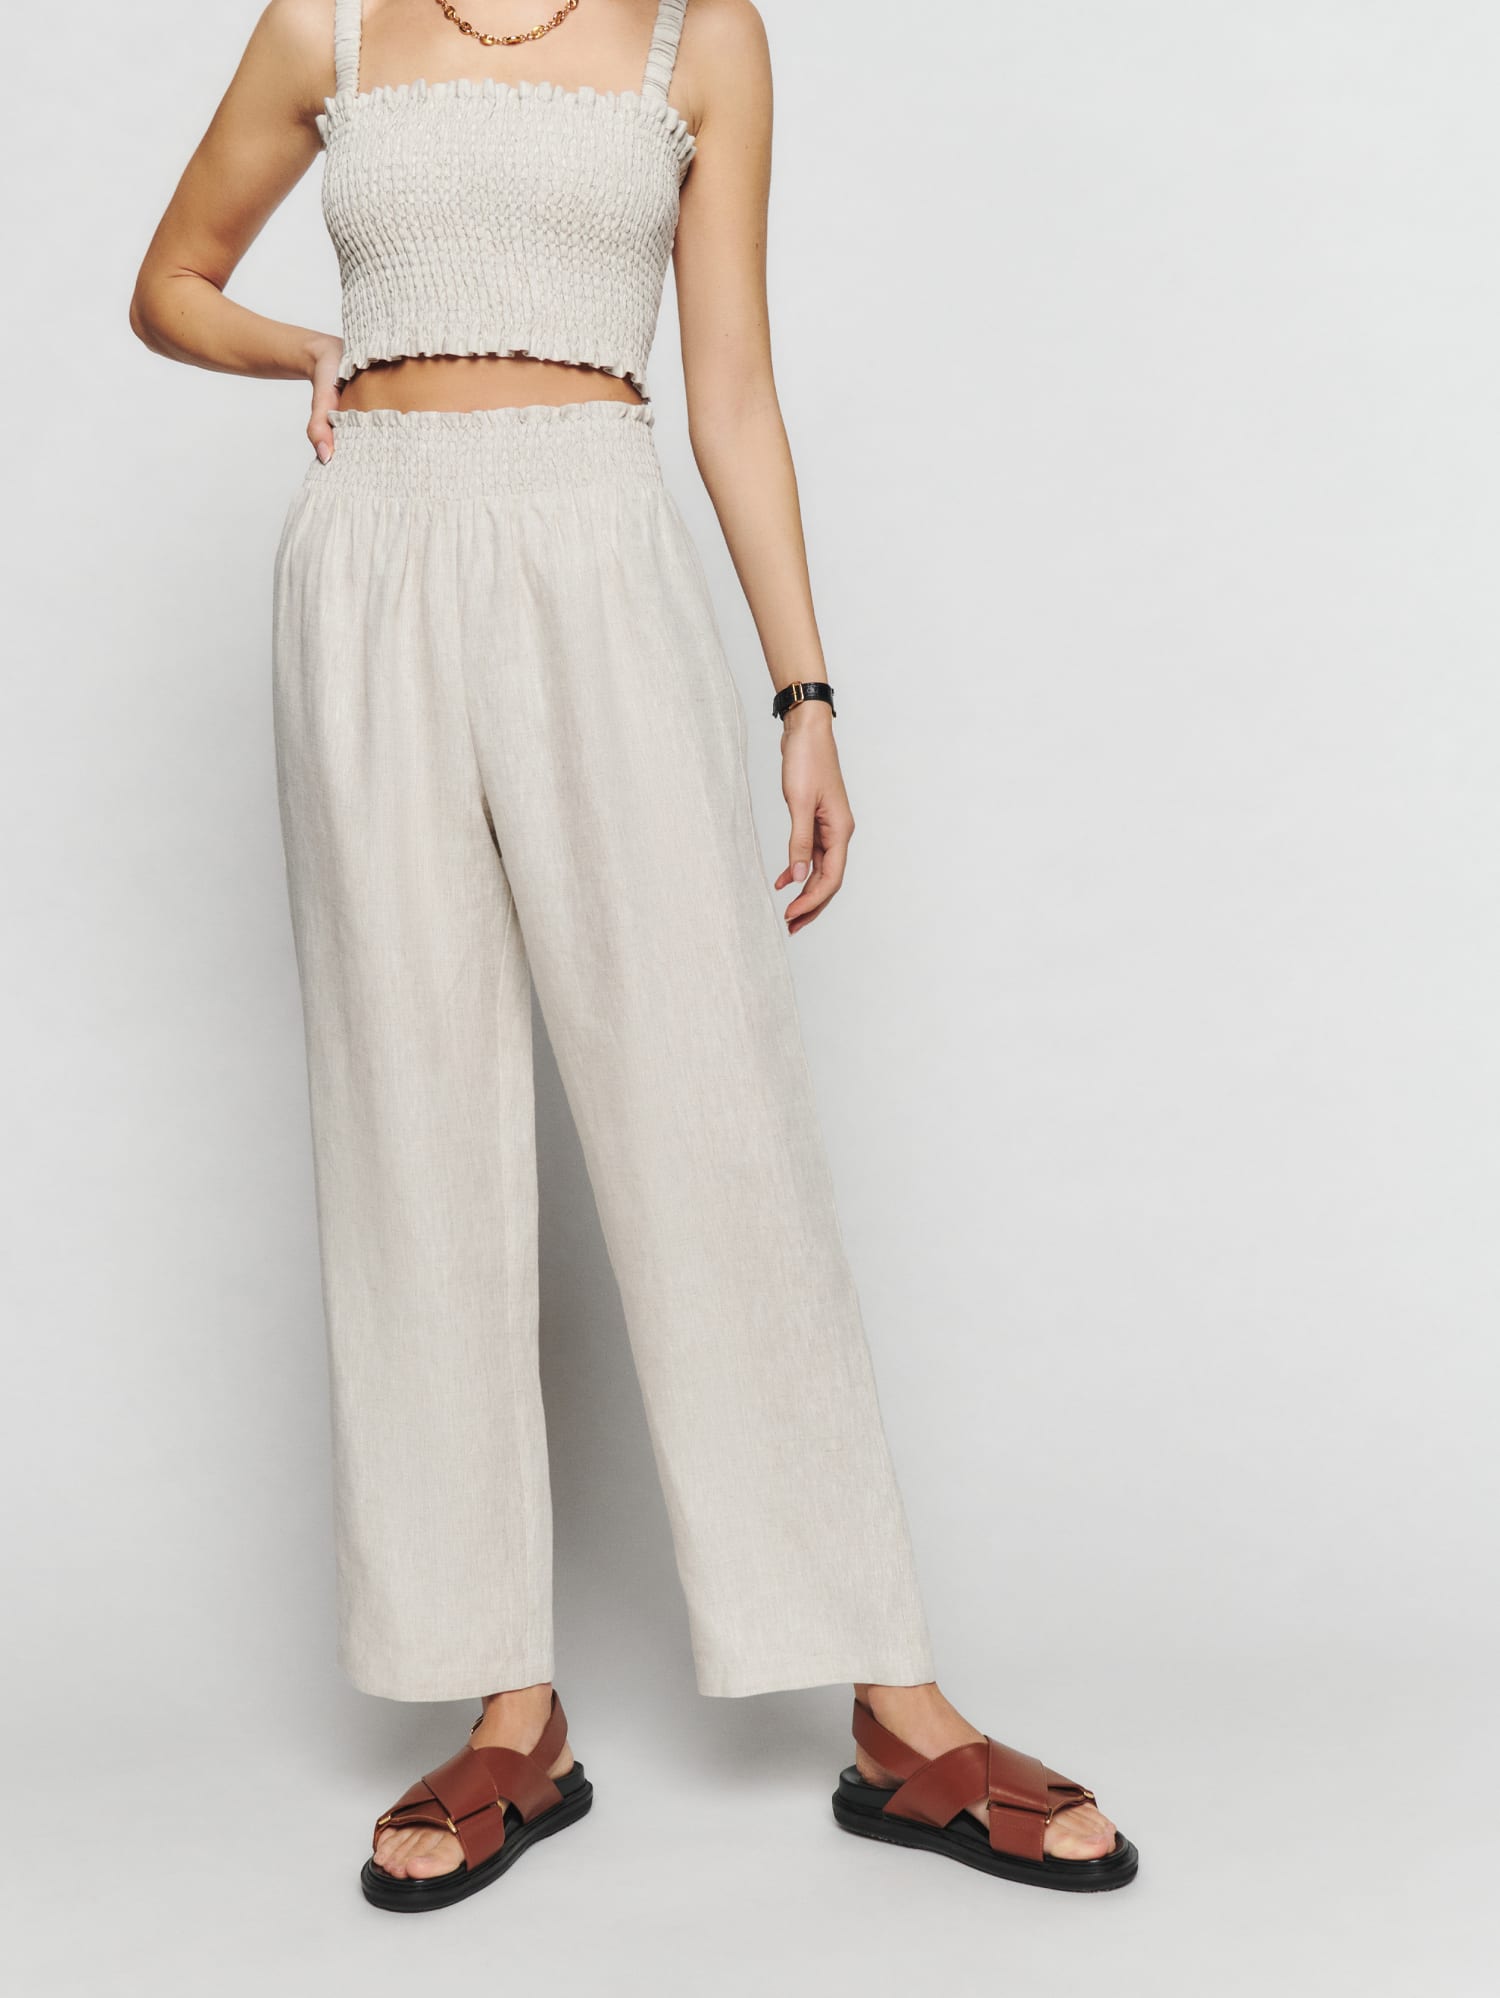 Cleo Linen Two Piece  Spaghetti strap crop top, Linen two piece